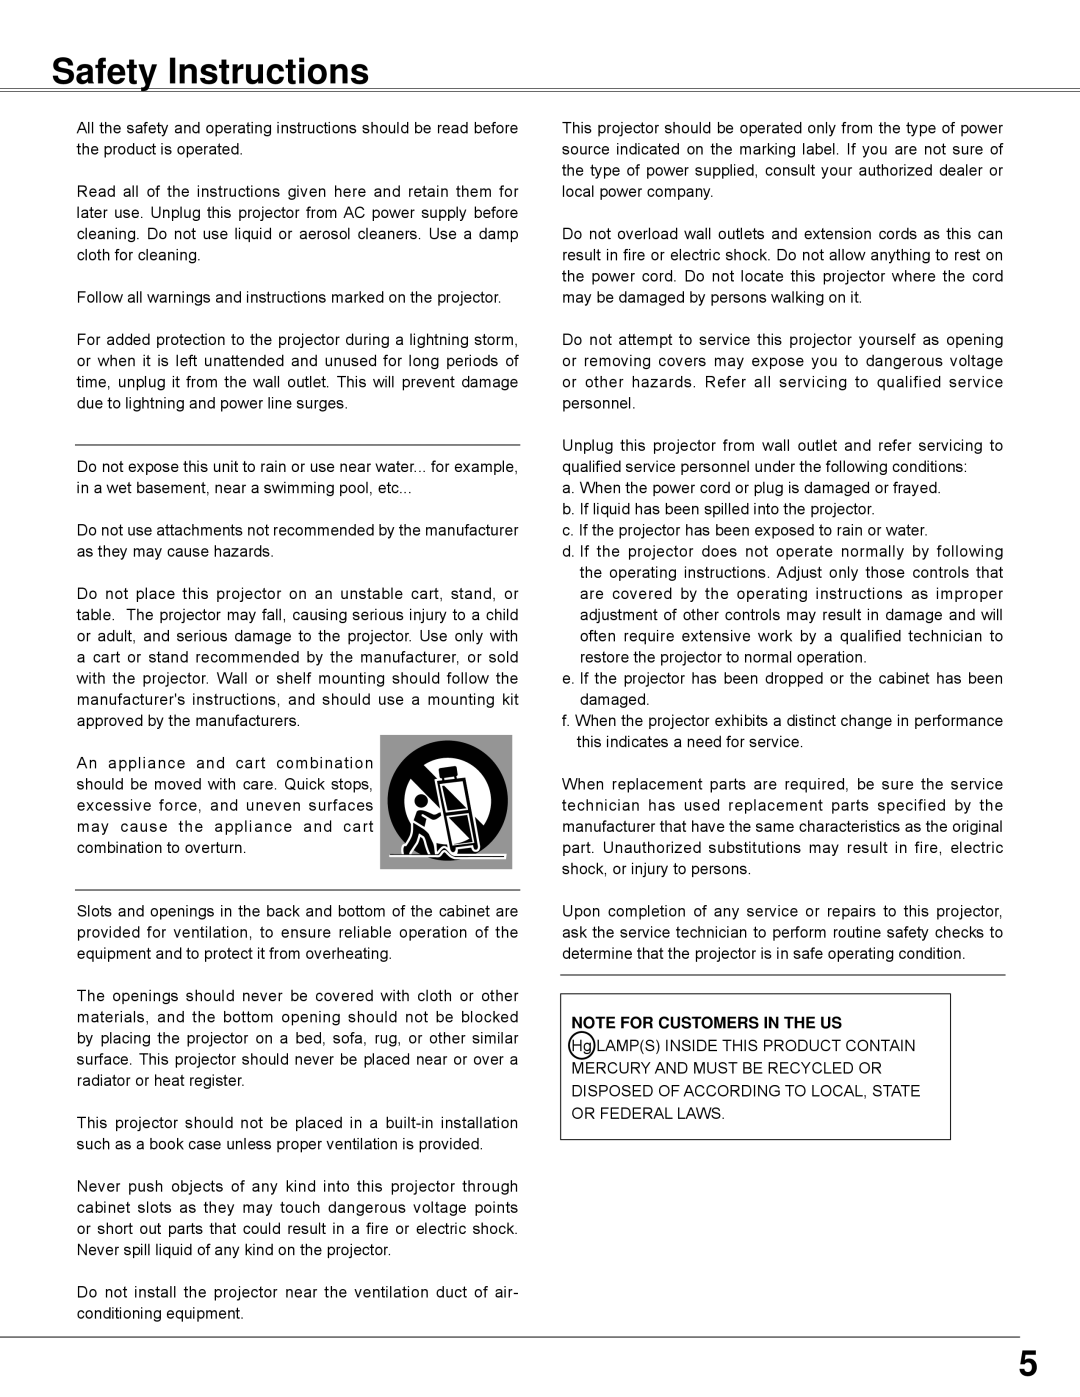 Sanyo PLC-WXE45 owner manual Safety Instructions, Note For Customers In The Us 